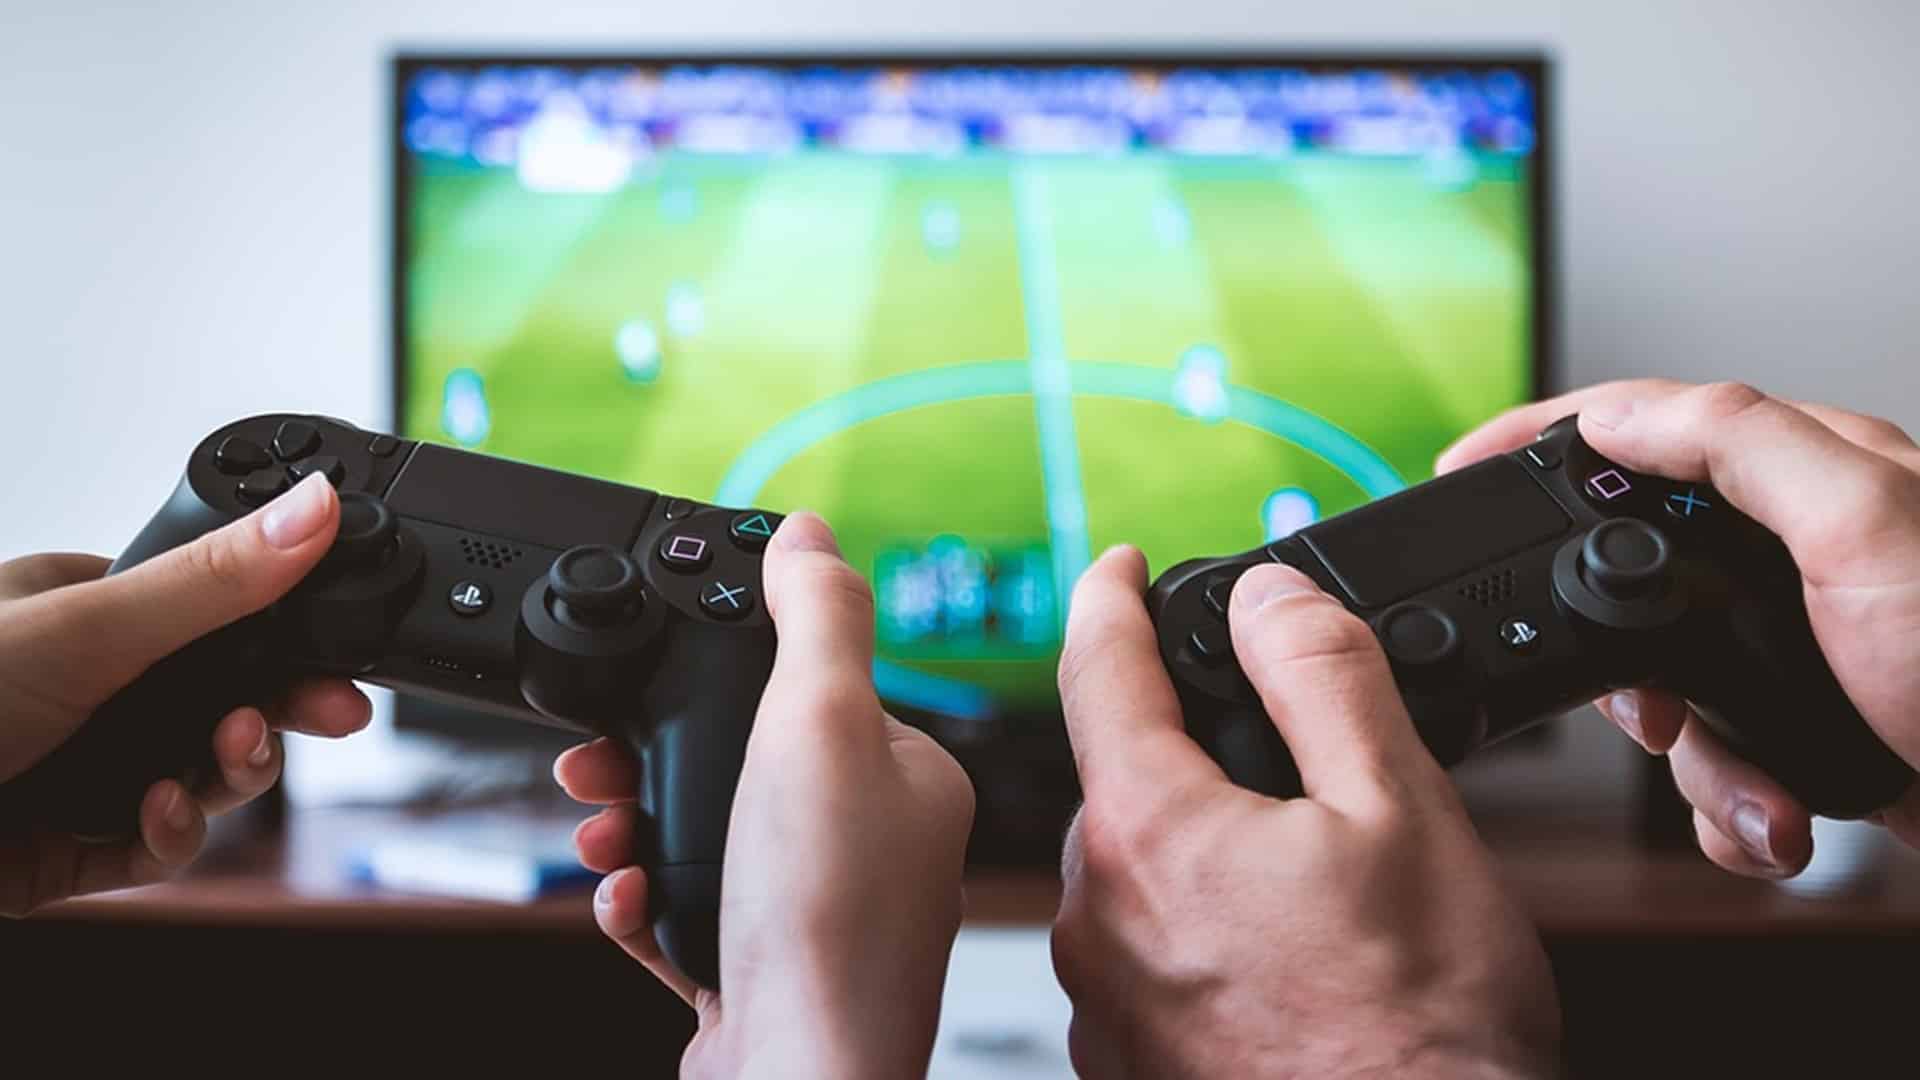 India’s gaming market is set to become $7 Bn in FY2026: Report